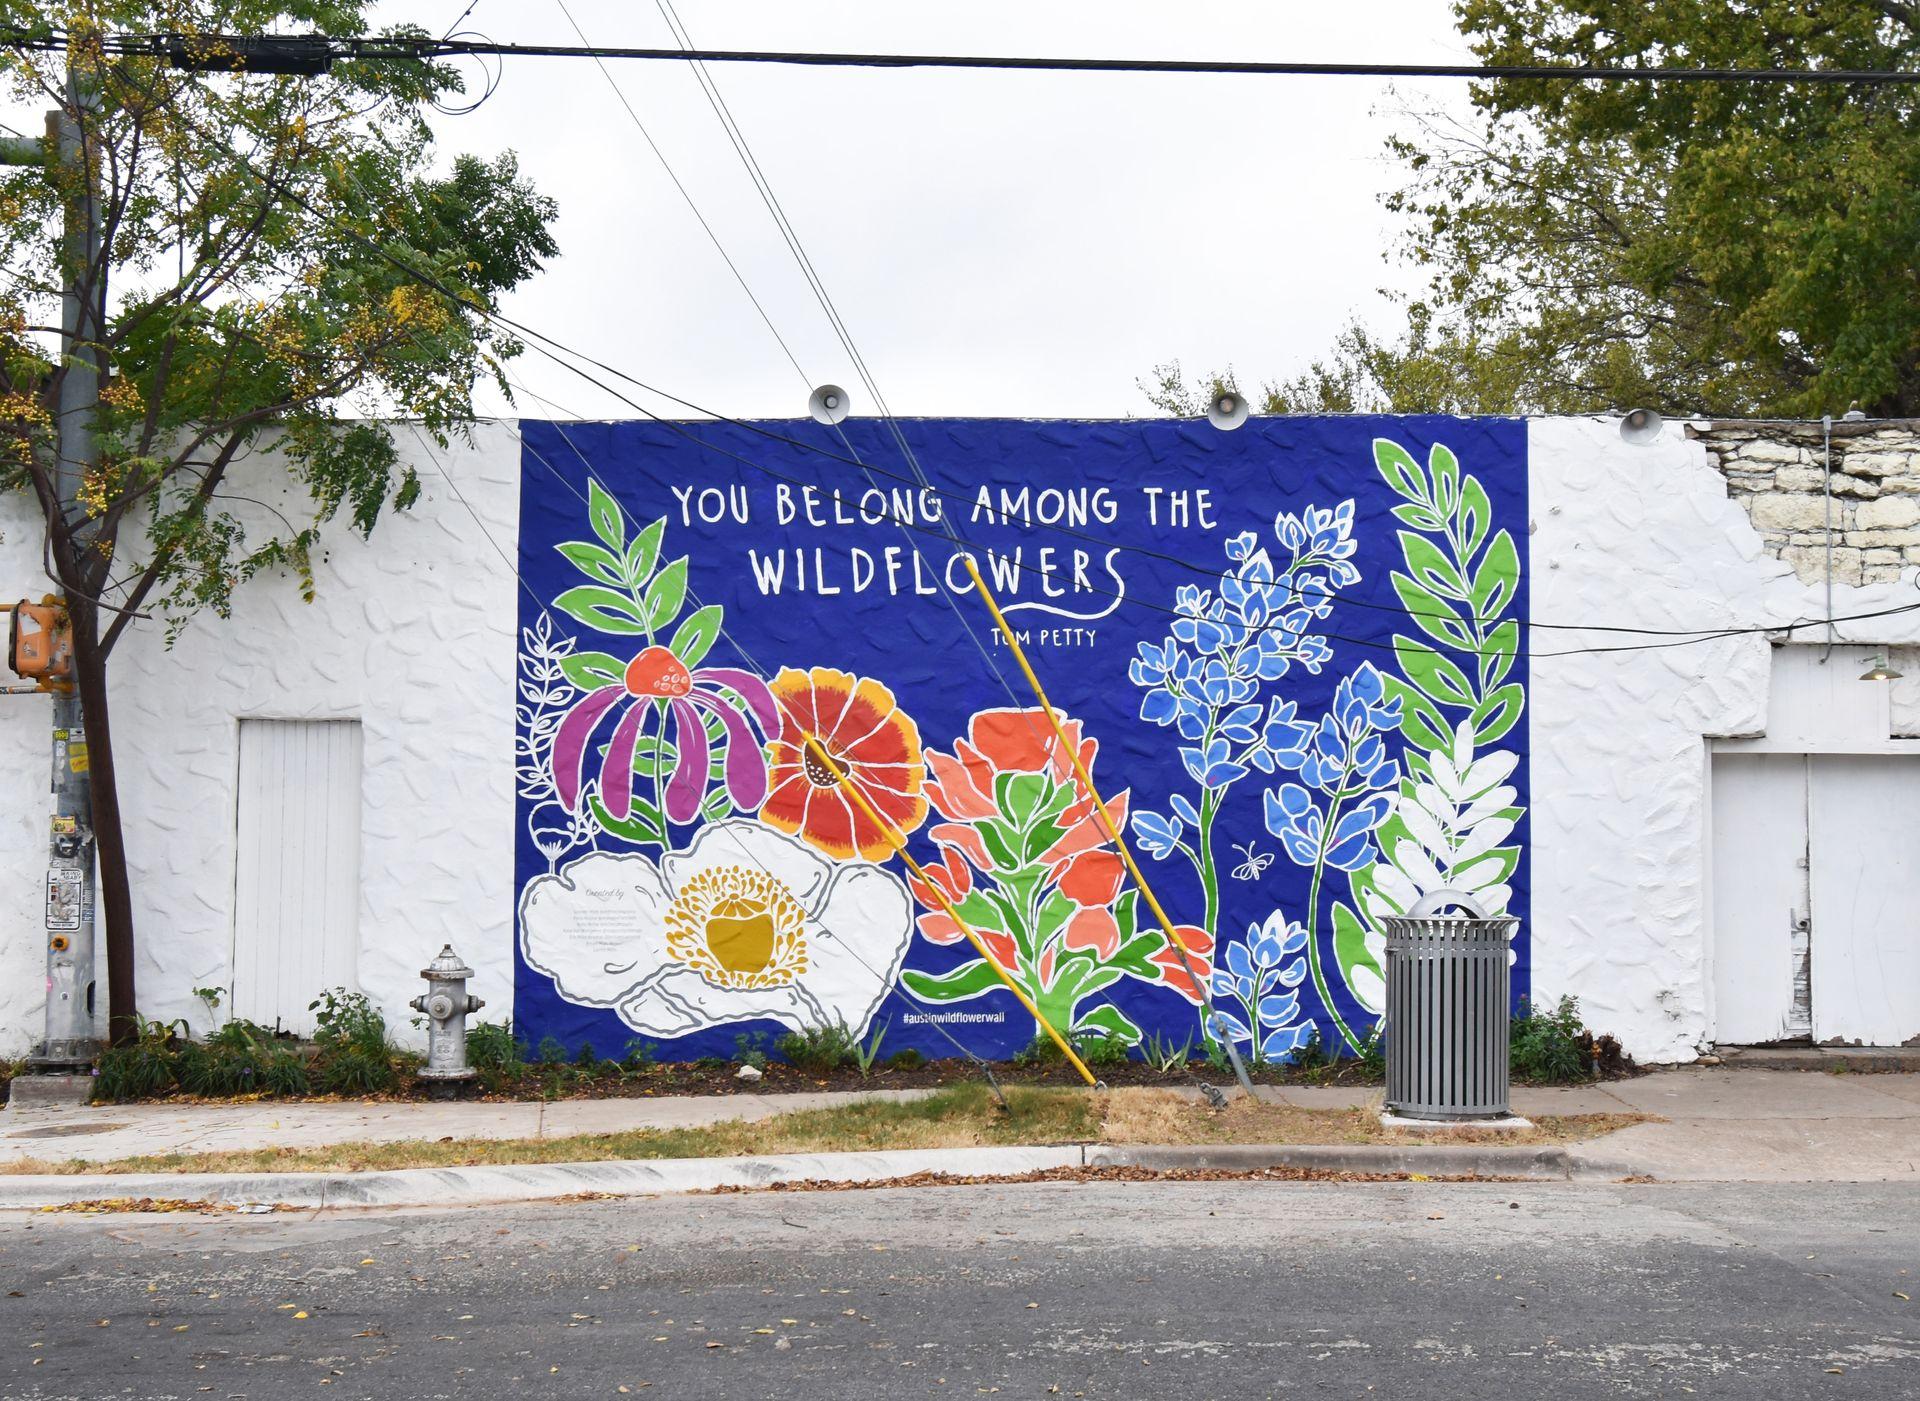 A mural that reads "You Belong Among the Wildflowers"